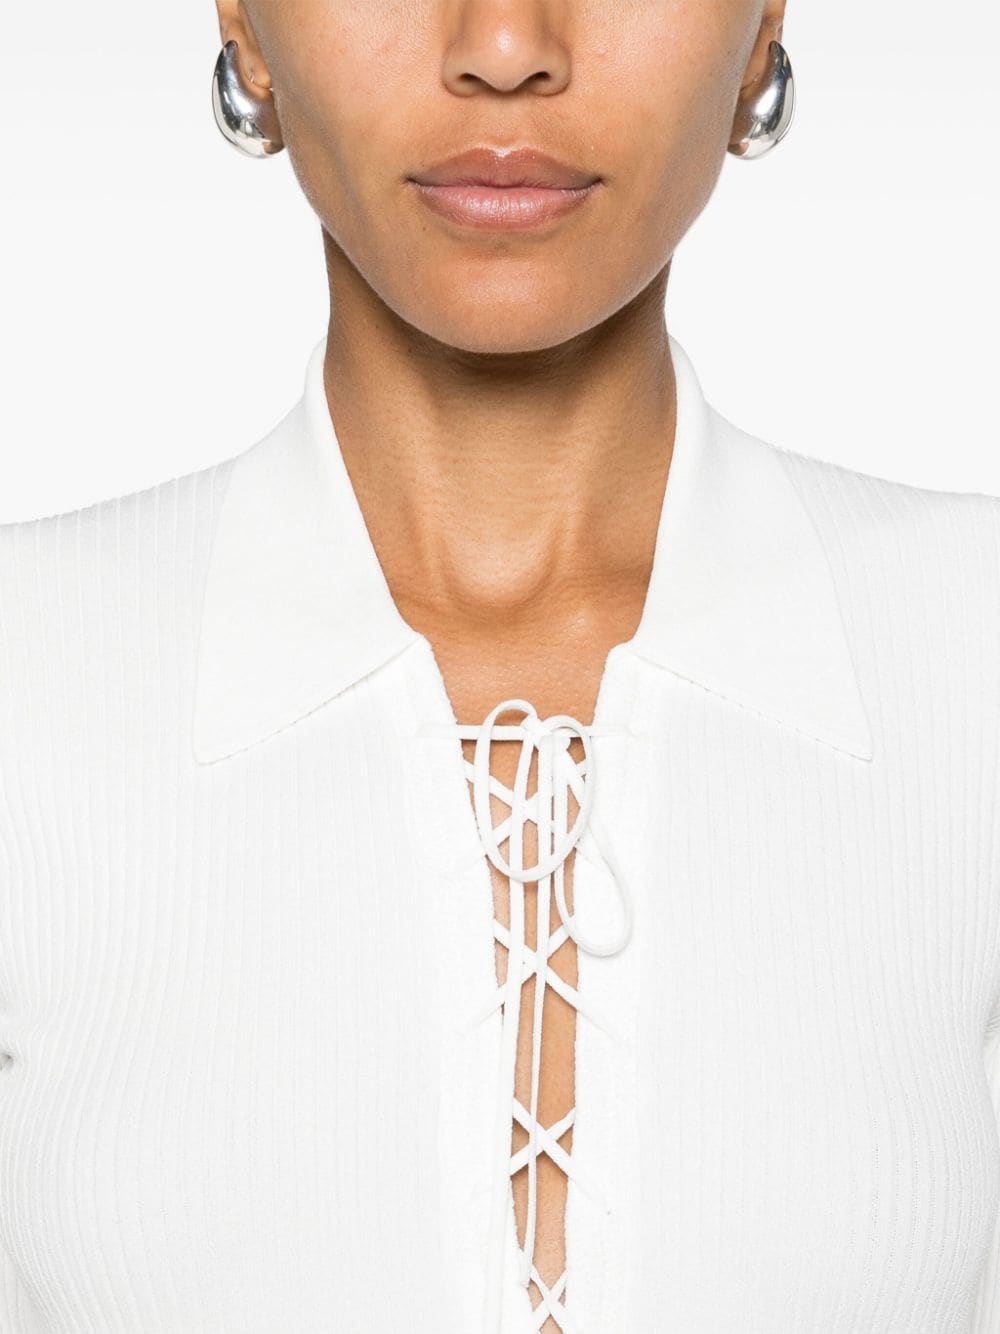 Shop Frame Lace-up Ribbed Top In White